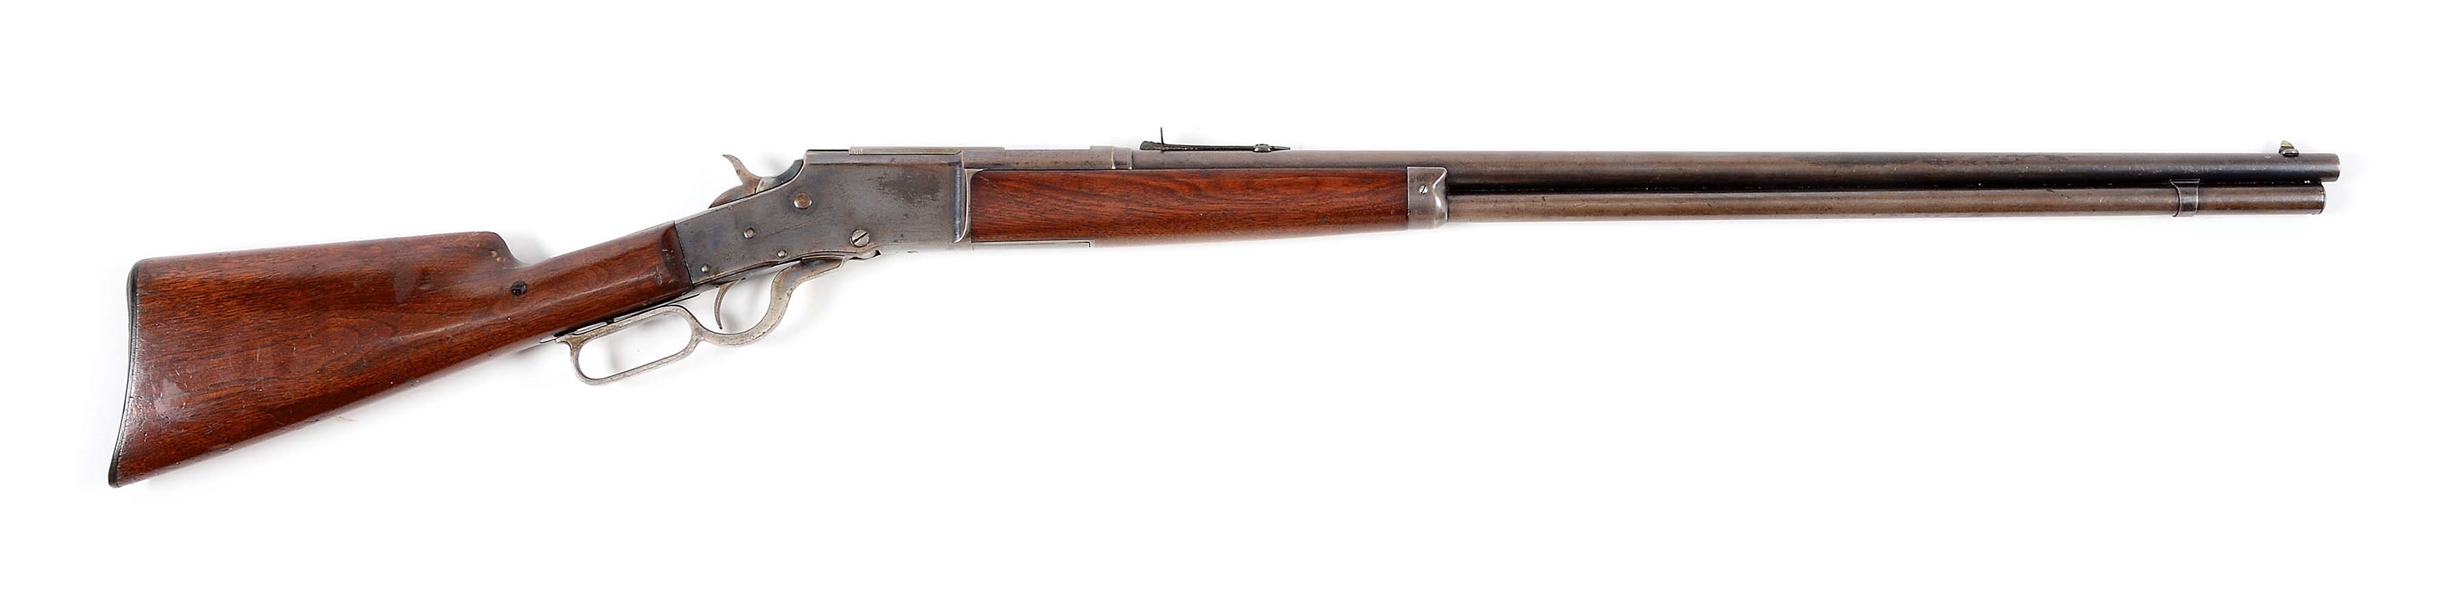 (A) BULLARD REPEATING ARMS CO. MODEL 1886 LARGE FRAME LEVER ACTION RIFLE.